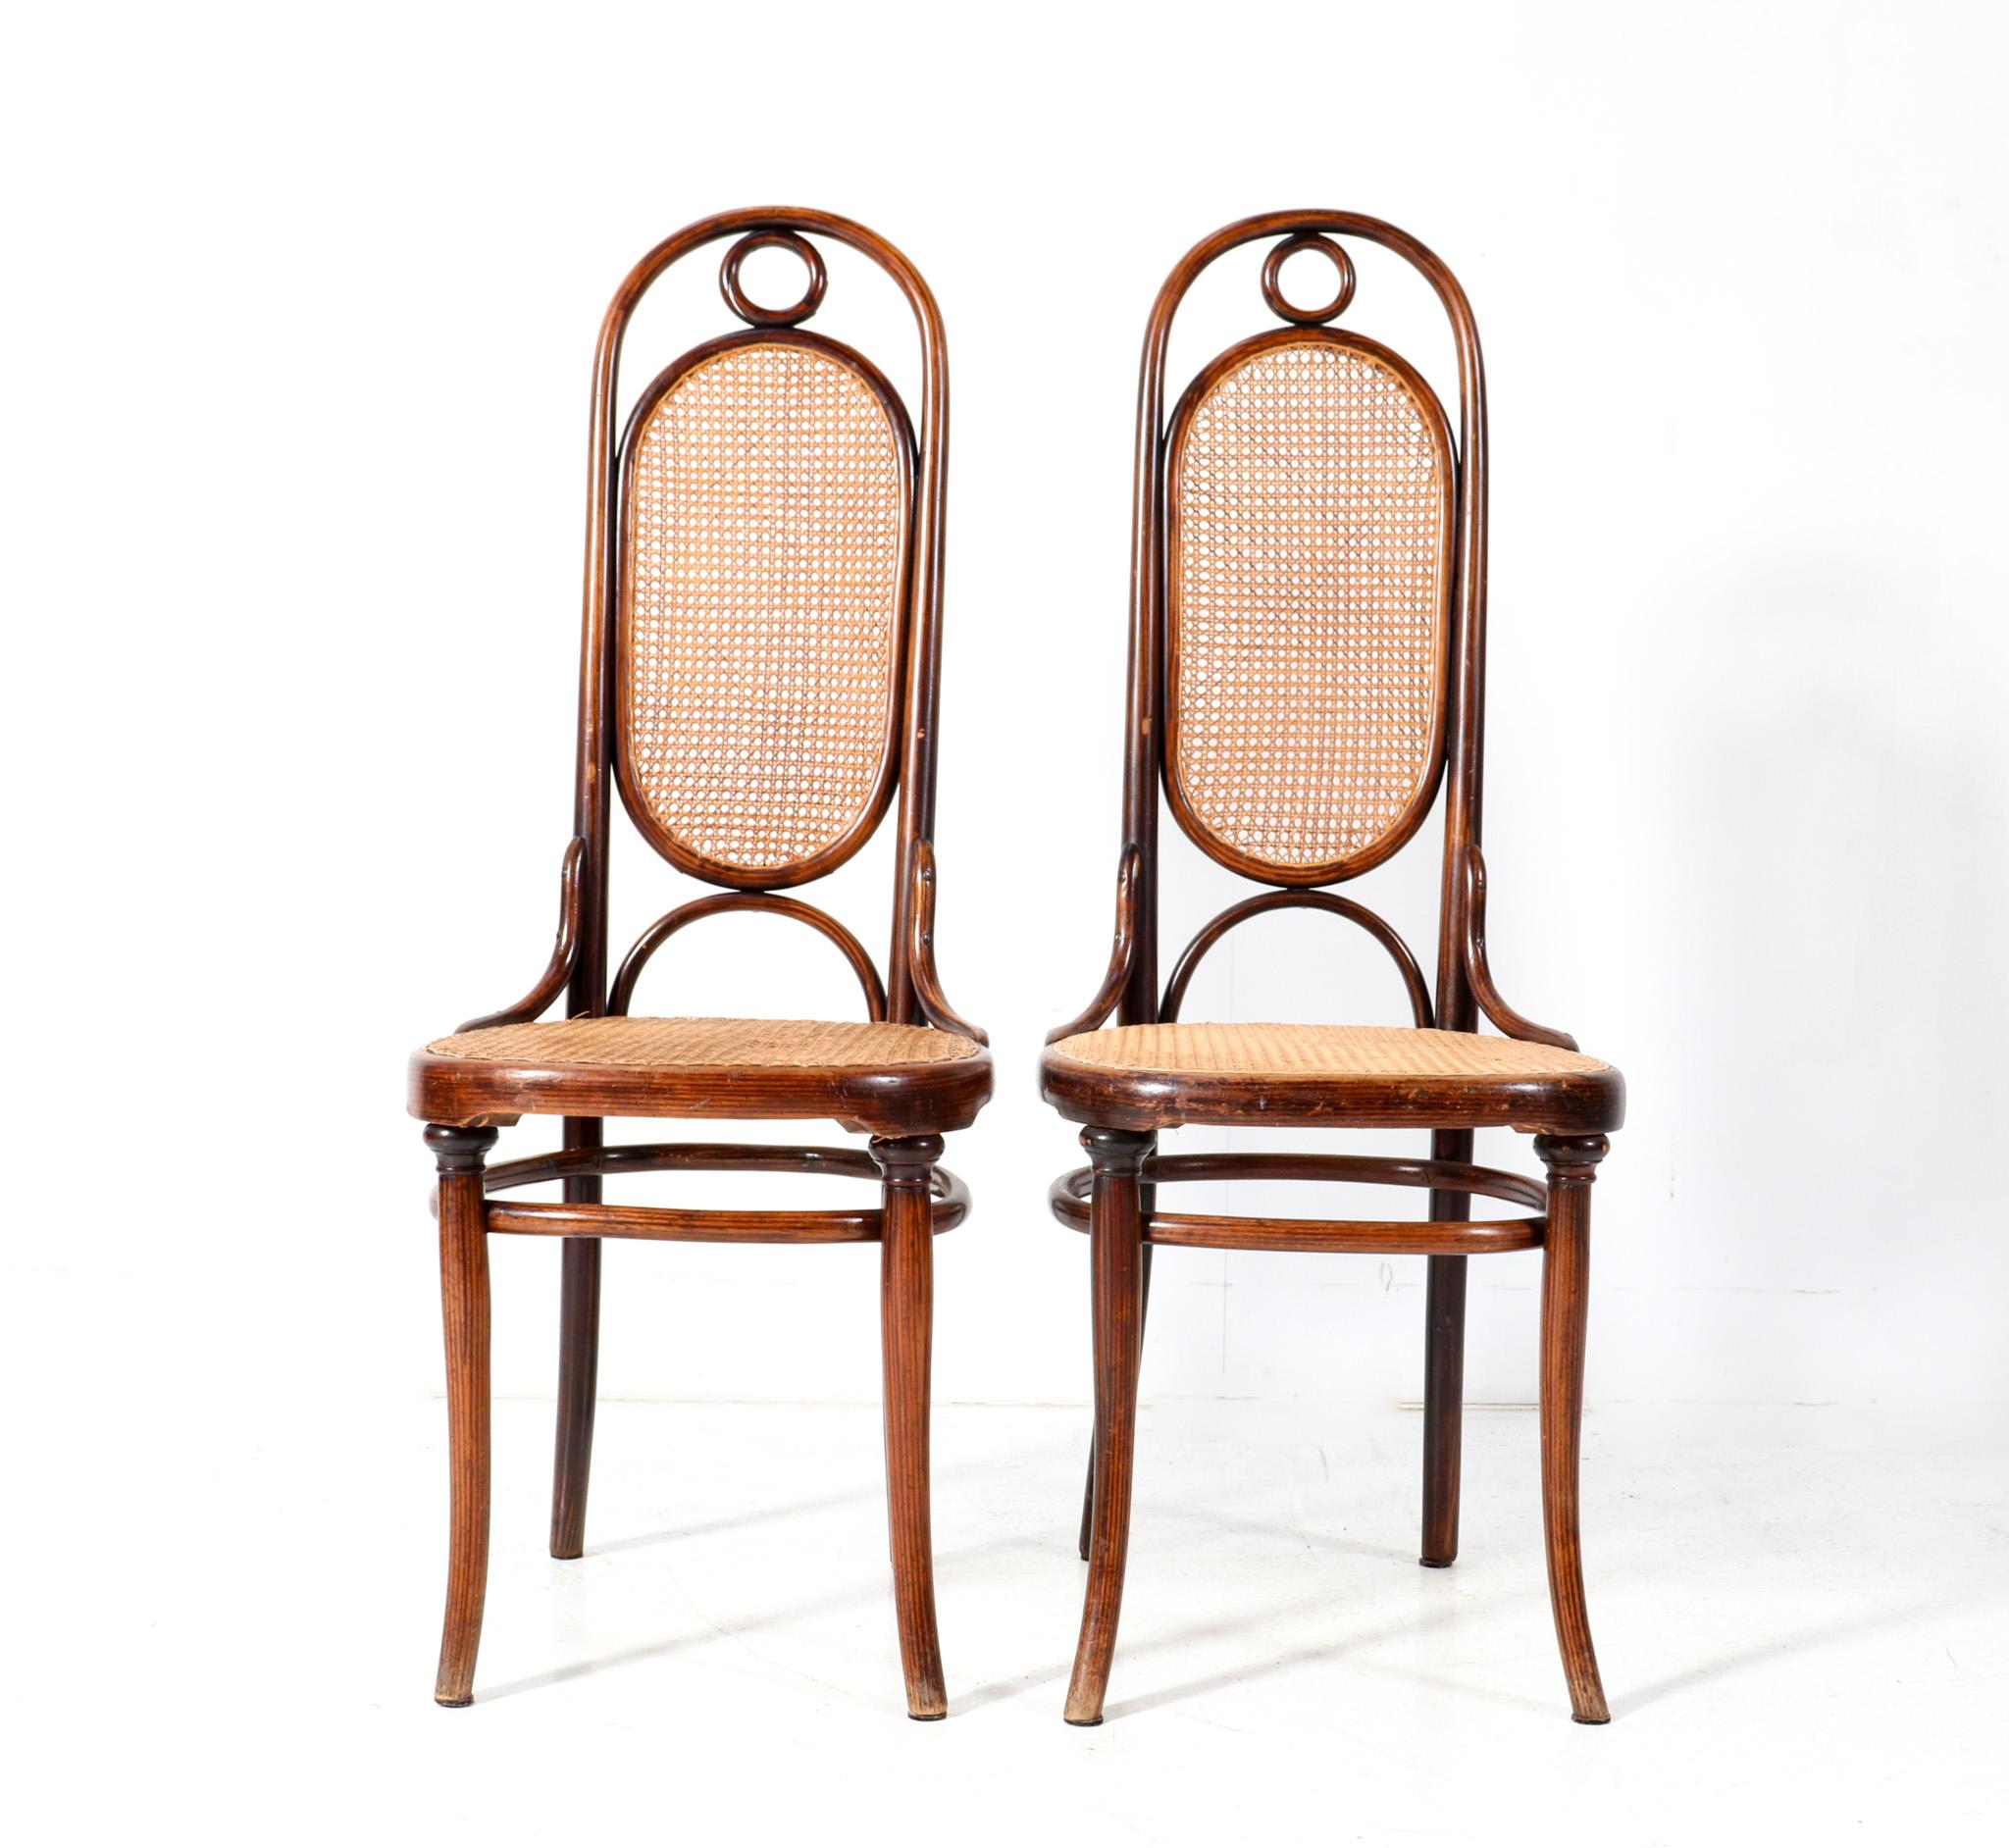 Pair of Beech Art Nouveau High Back Chairs Model 17 by Michael Thonet, 1890s In Good Condition For Sale In Amsterdam, NL